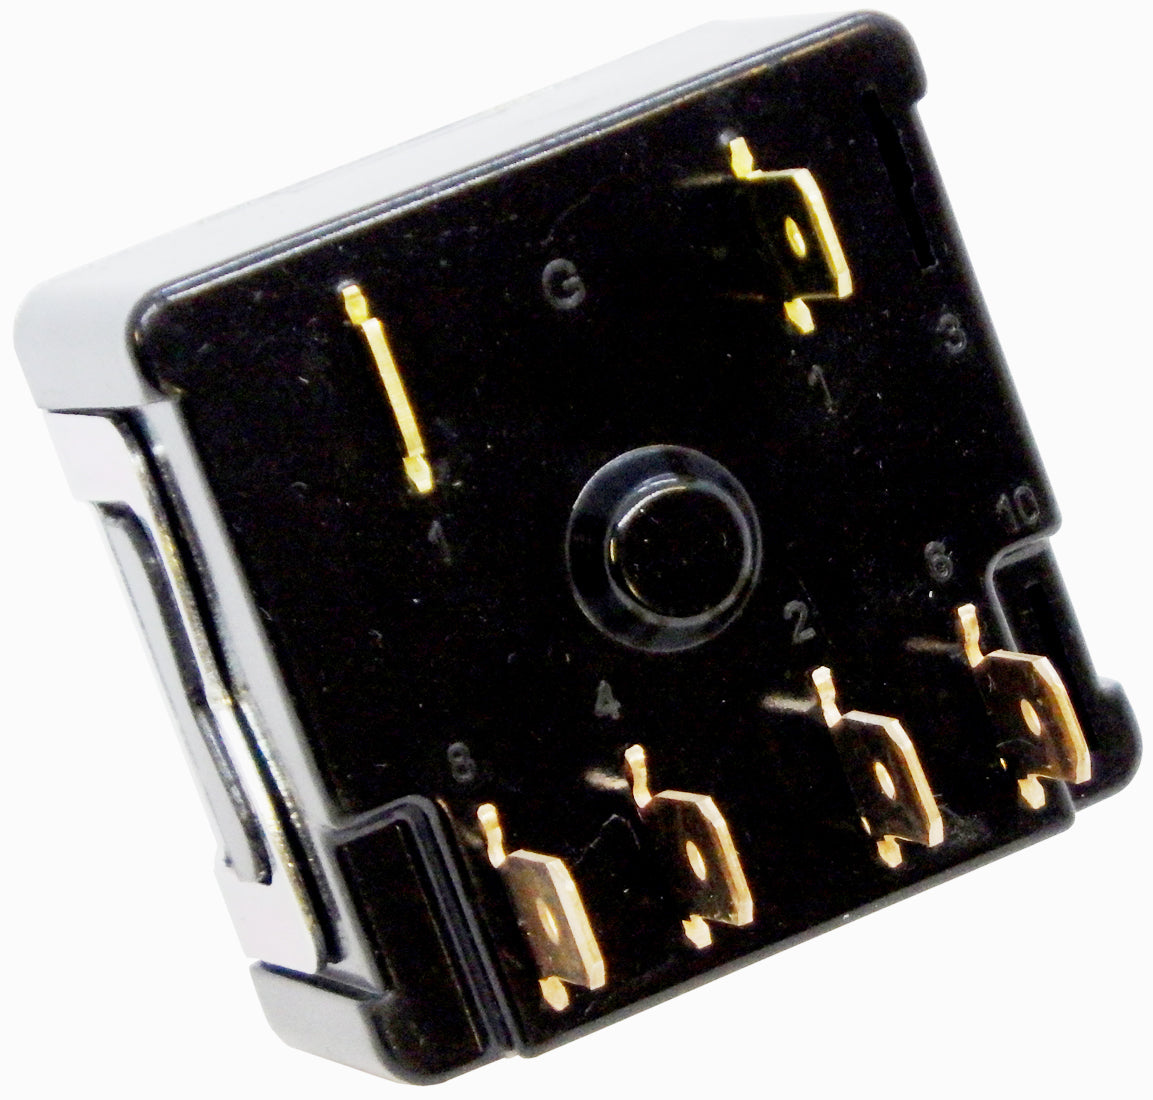 697015 - Power Forged Battery Charger Switch Kit - 8-Position Replaces Associated Eqpt 611187